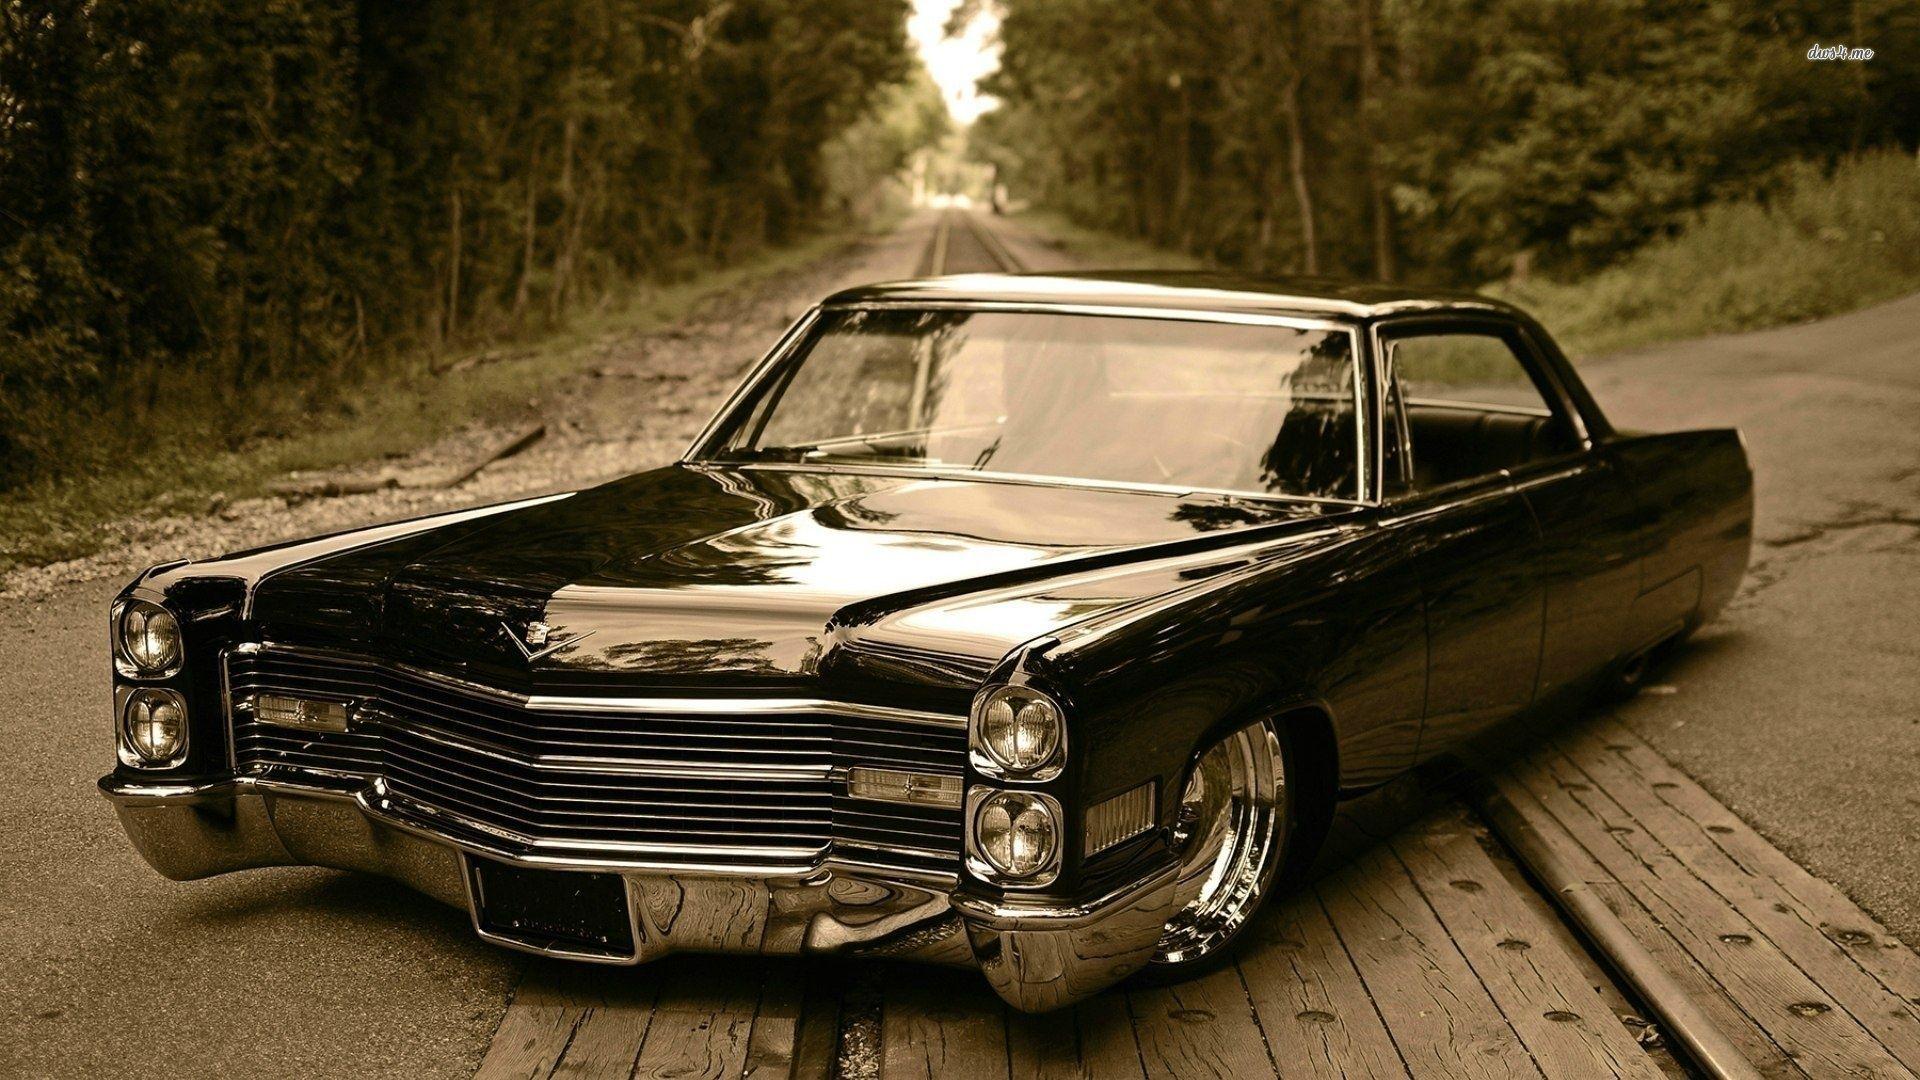 image For > Cadillac Lowrider Wallpaper